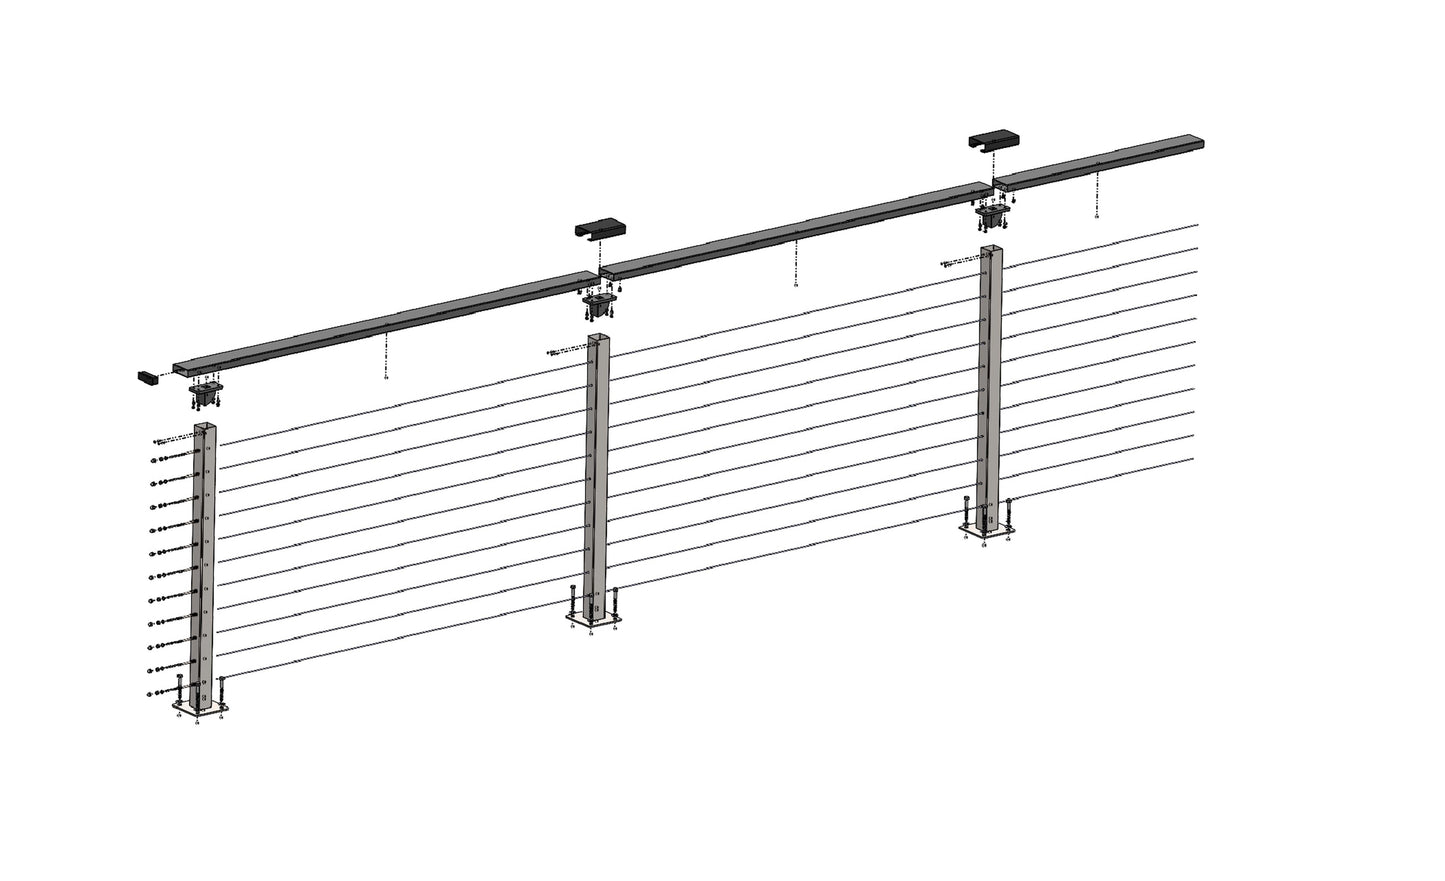 66 ft. x 42 in. White Deck Cable Railing, Base Mount